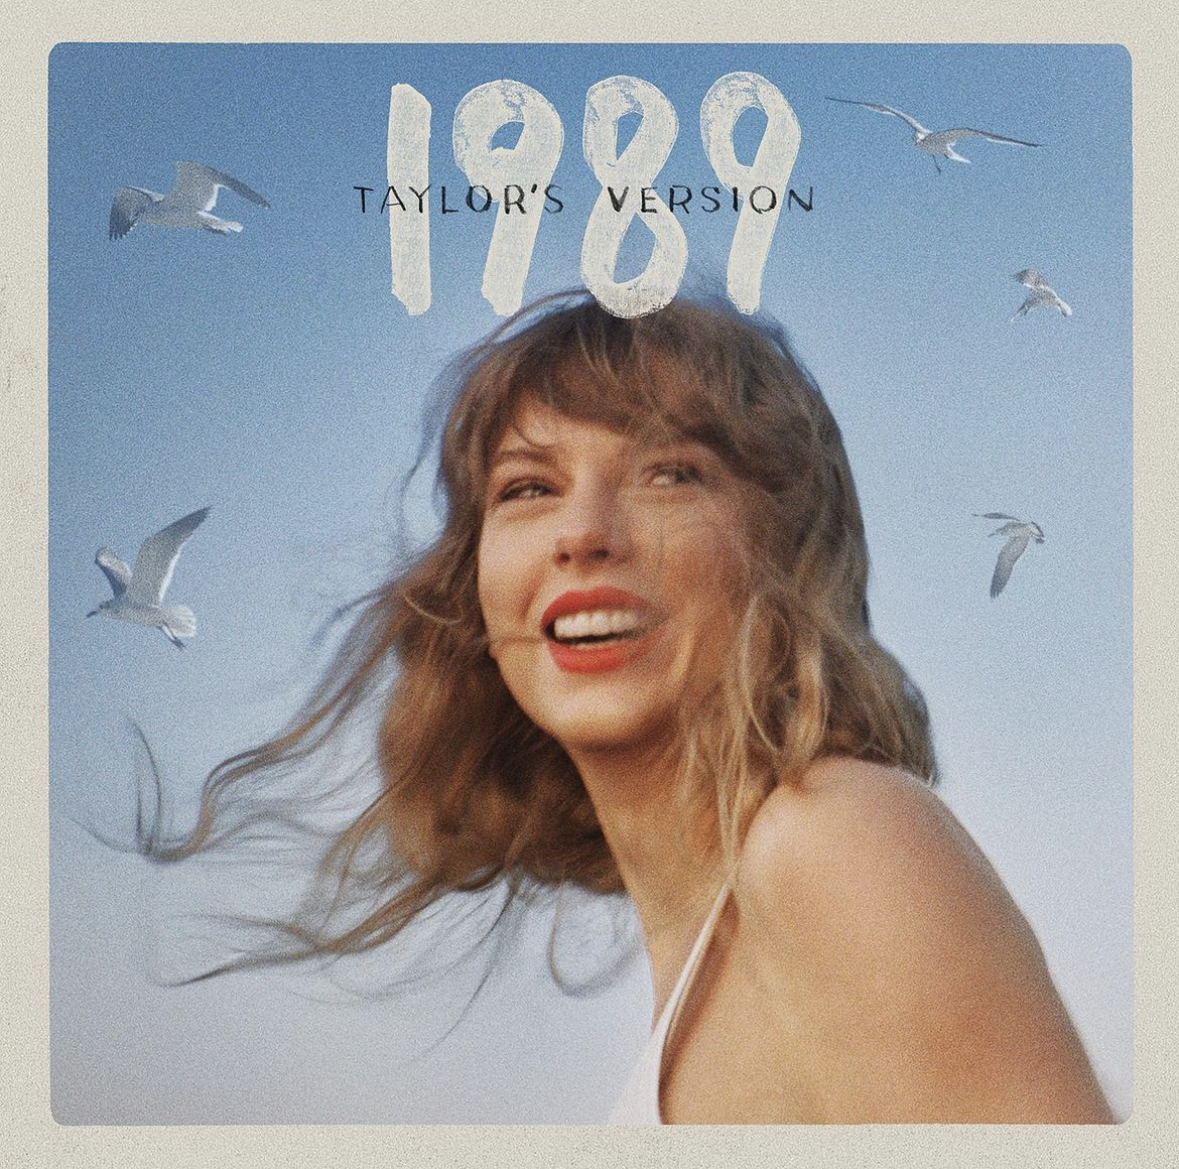 Taylor Swift poses for her album cover for her newest rerecorded album, 1989 (Taylors Version). Fans are able to pre-order the new album on taylorswift.com.